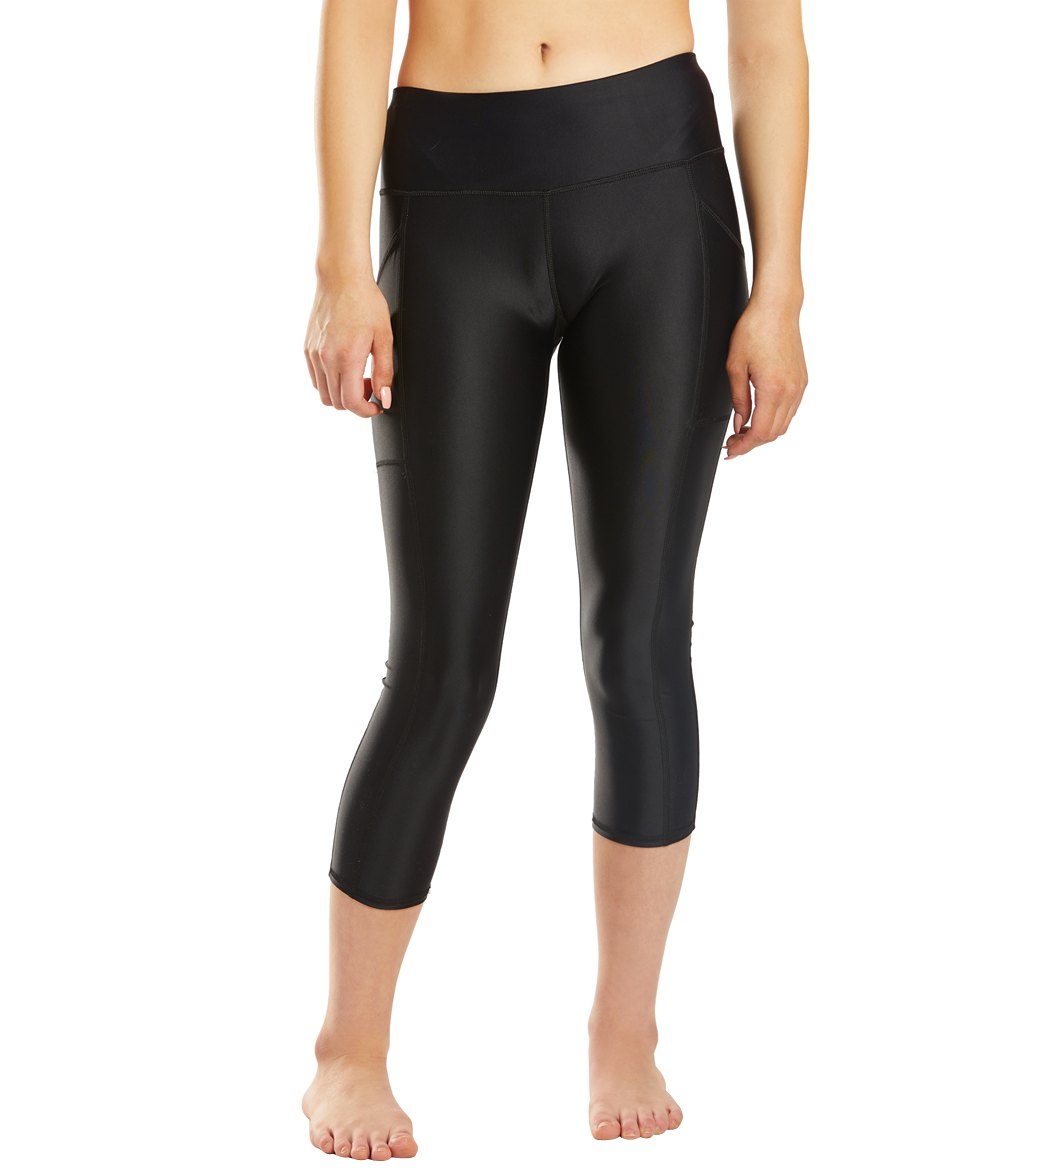 Gottex Women's Workout Pants Size Small Leggings Black White Phone Pocket  Side c - $25 - From April